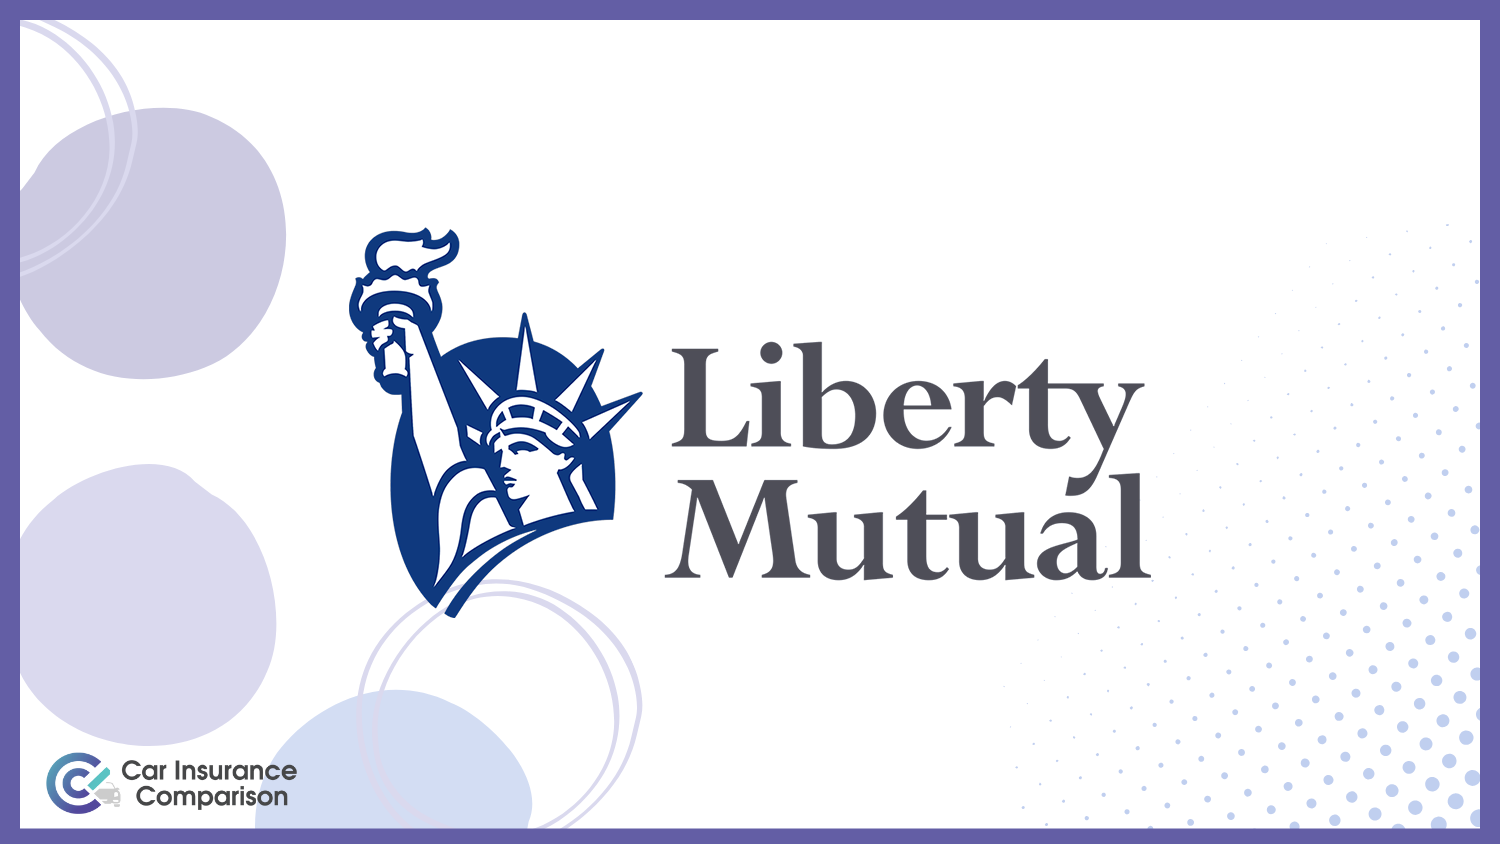 Liberty Mutual: Compare Best Car Insurance Companies That Only Look Back Three Years